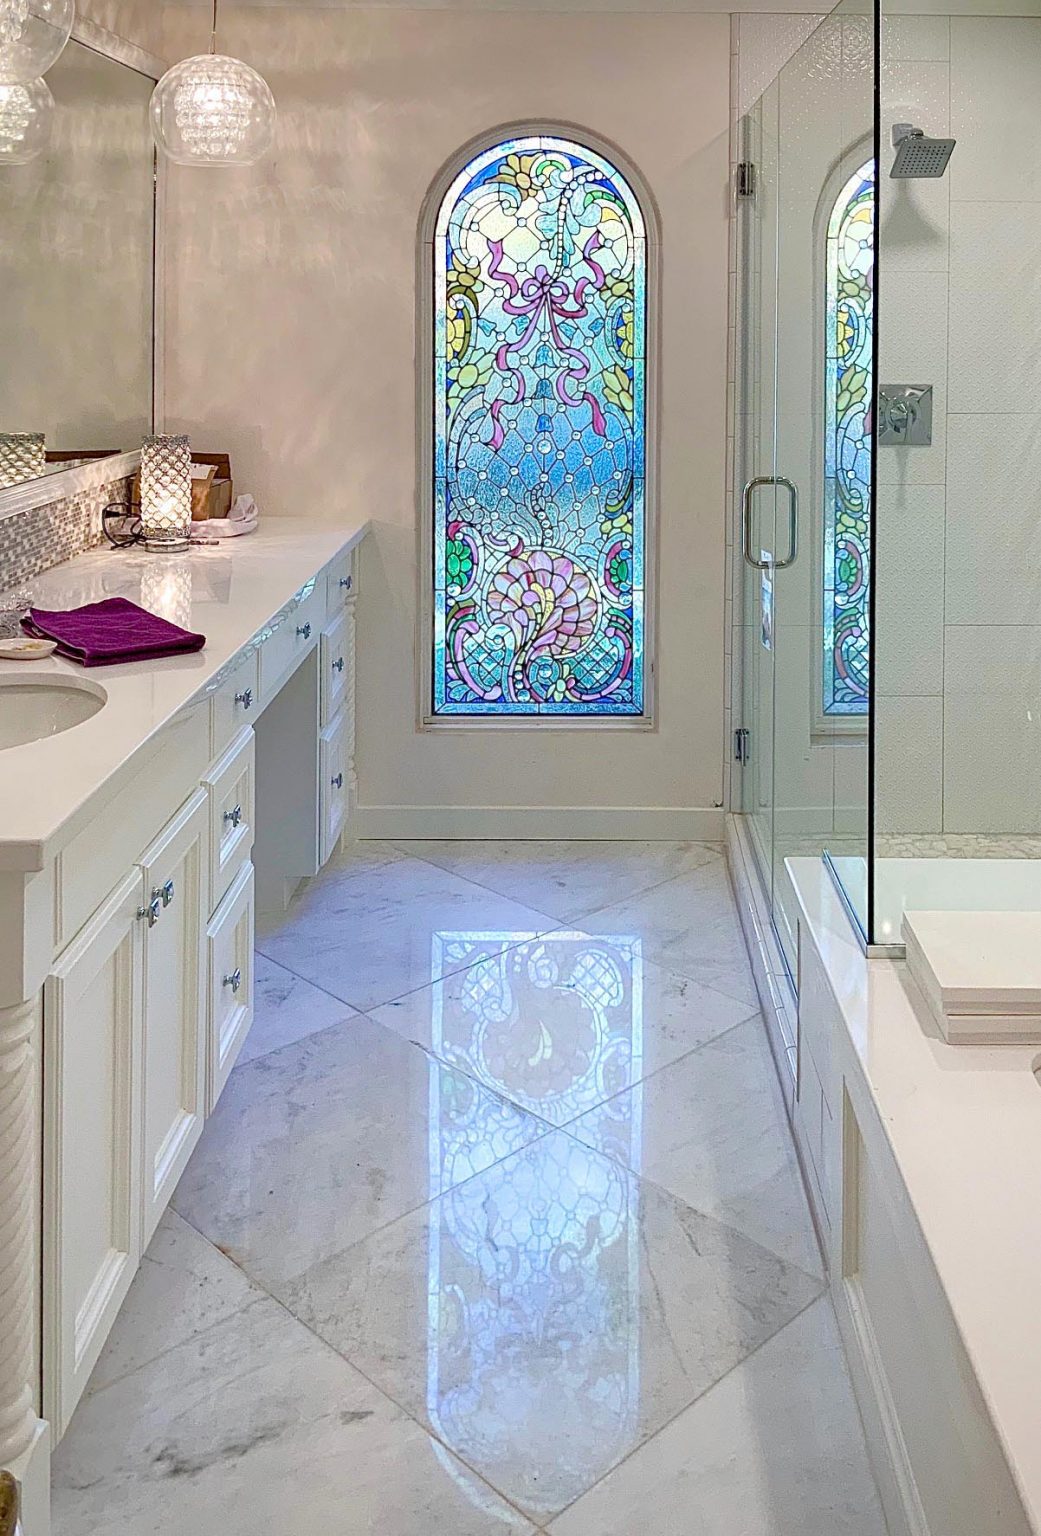 Blog - Kanas City Stained Glass | (816) 399-3830